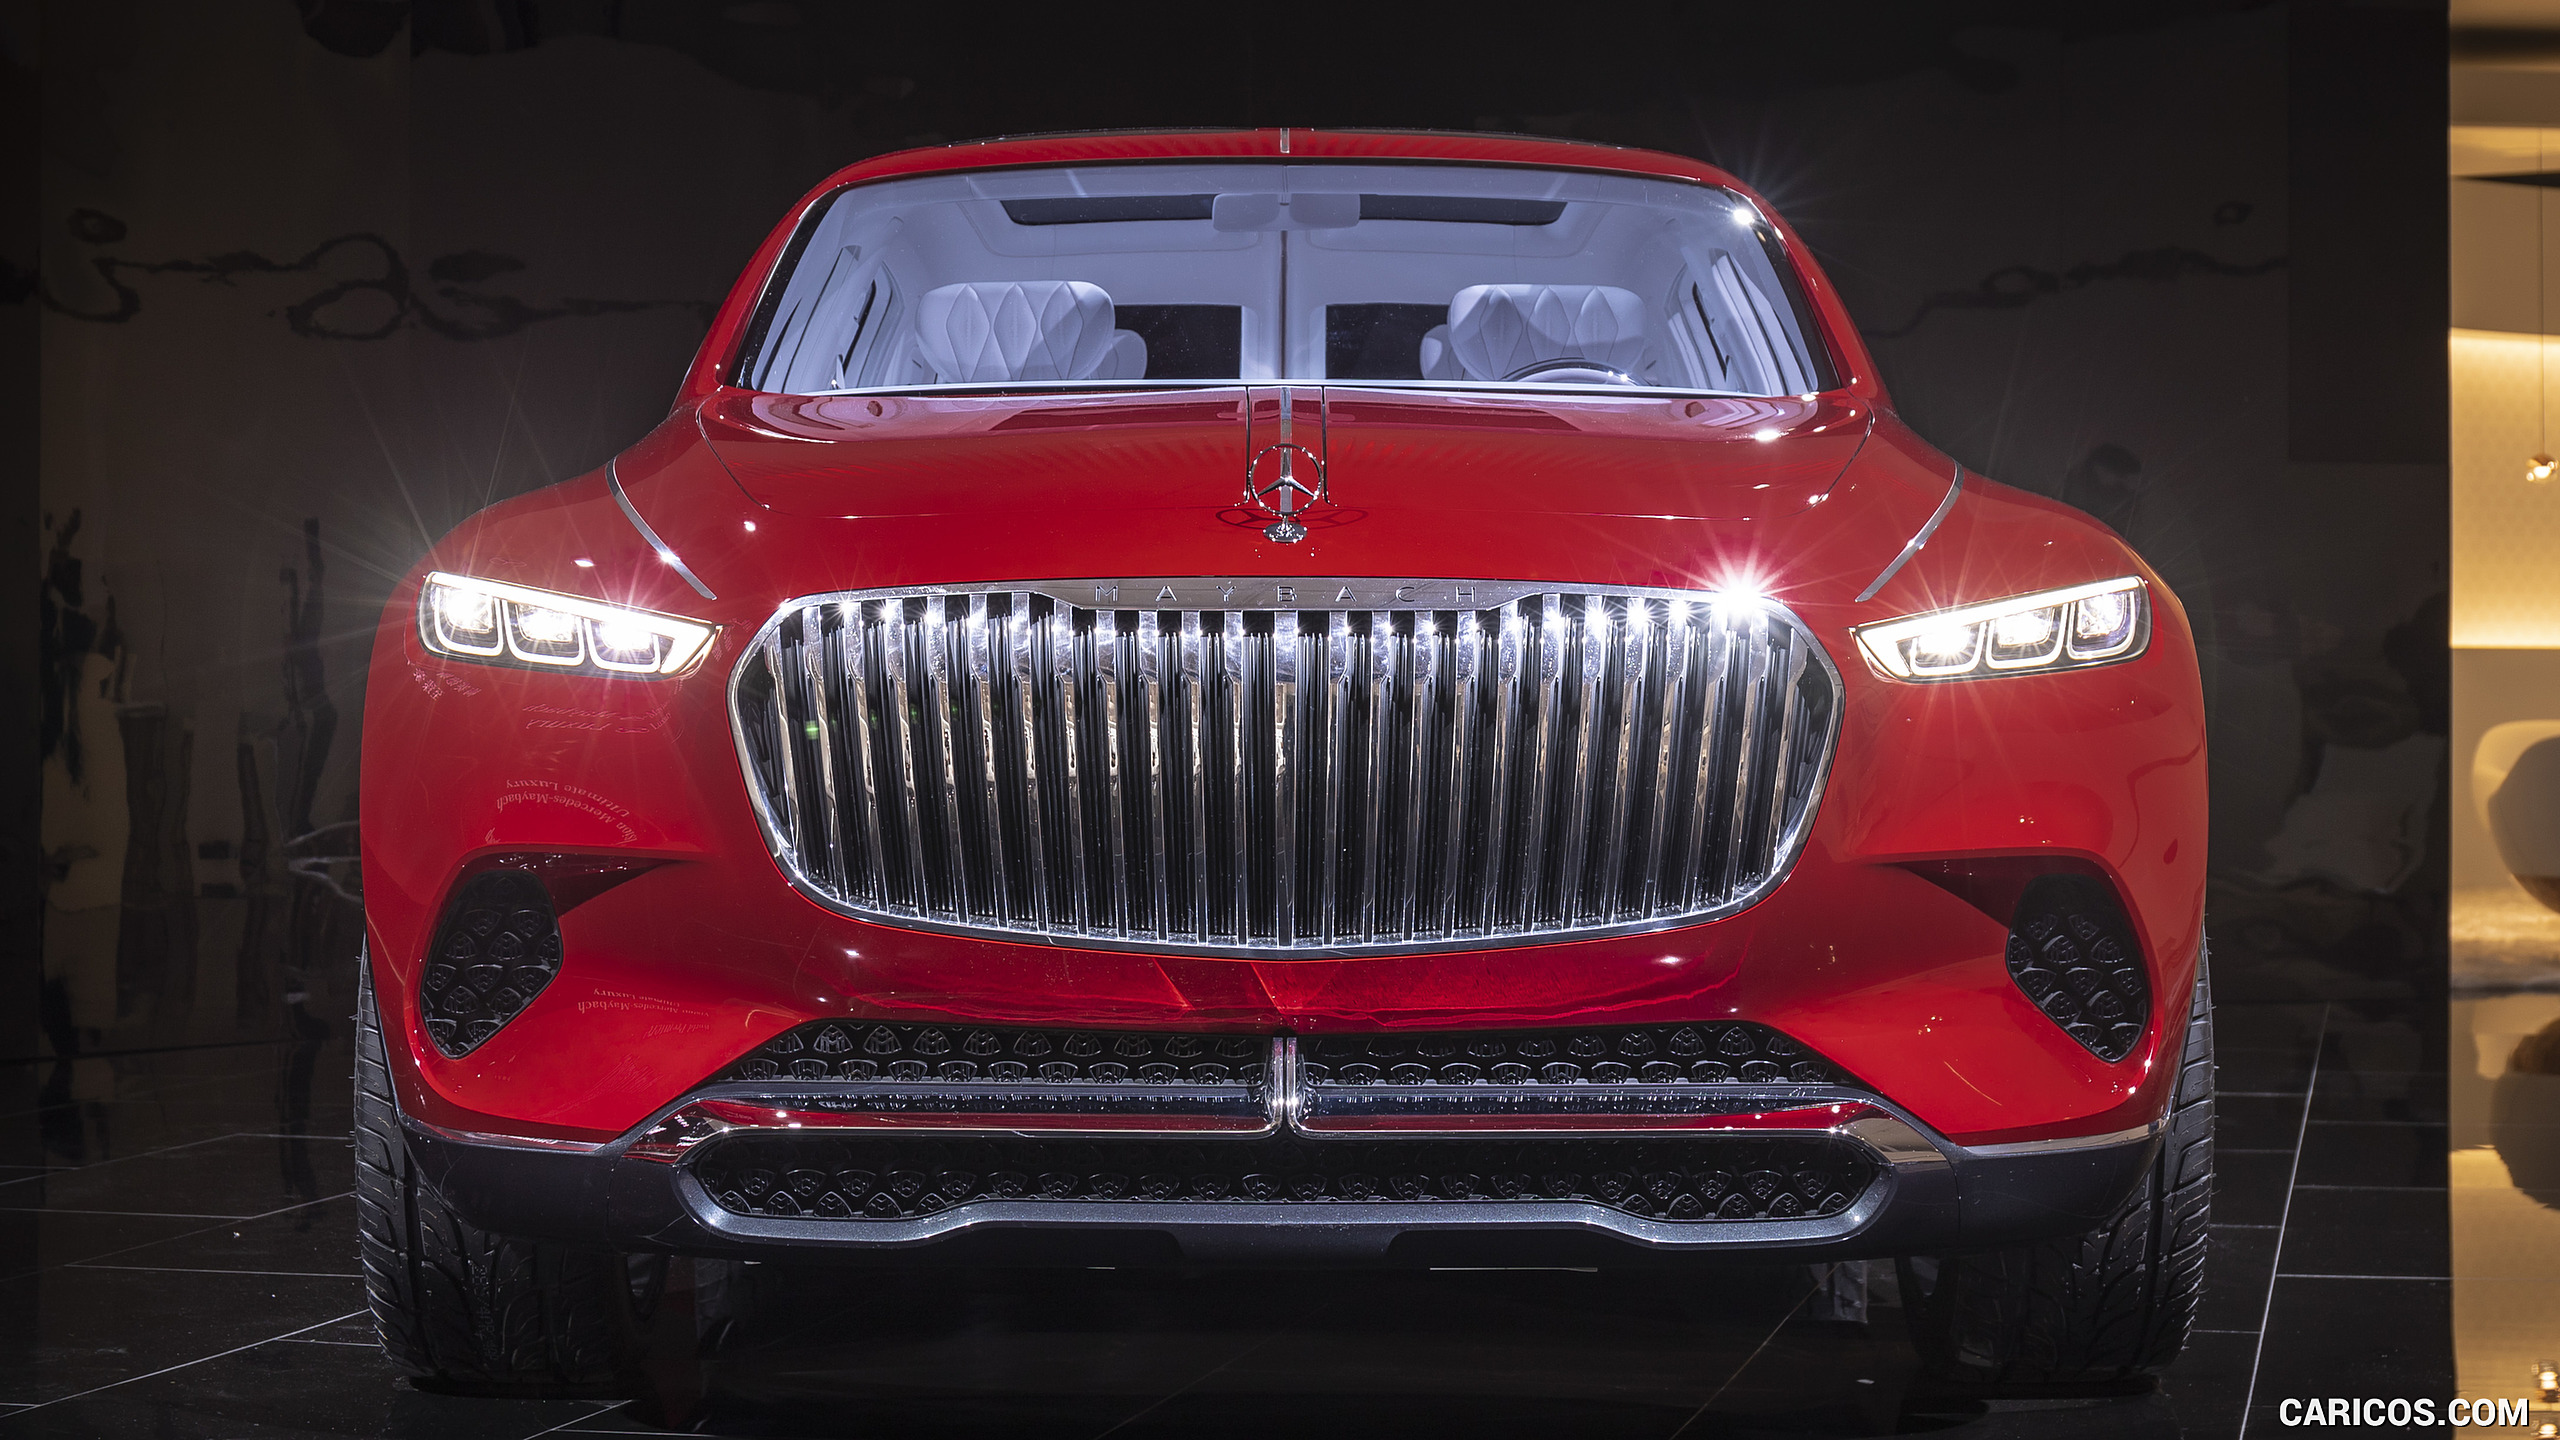 2018 Mercedes-Maybach Vision Ultimate Luxury SUV Concept - Front, #14 of 41